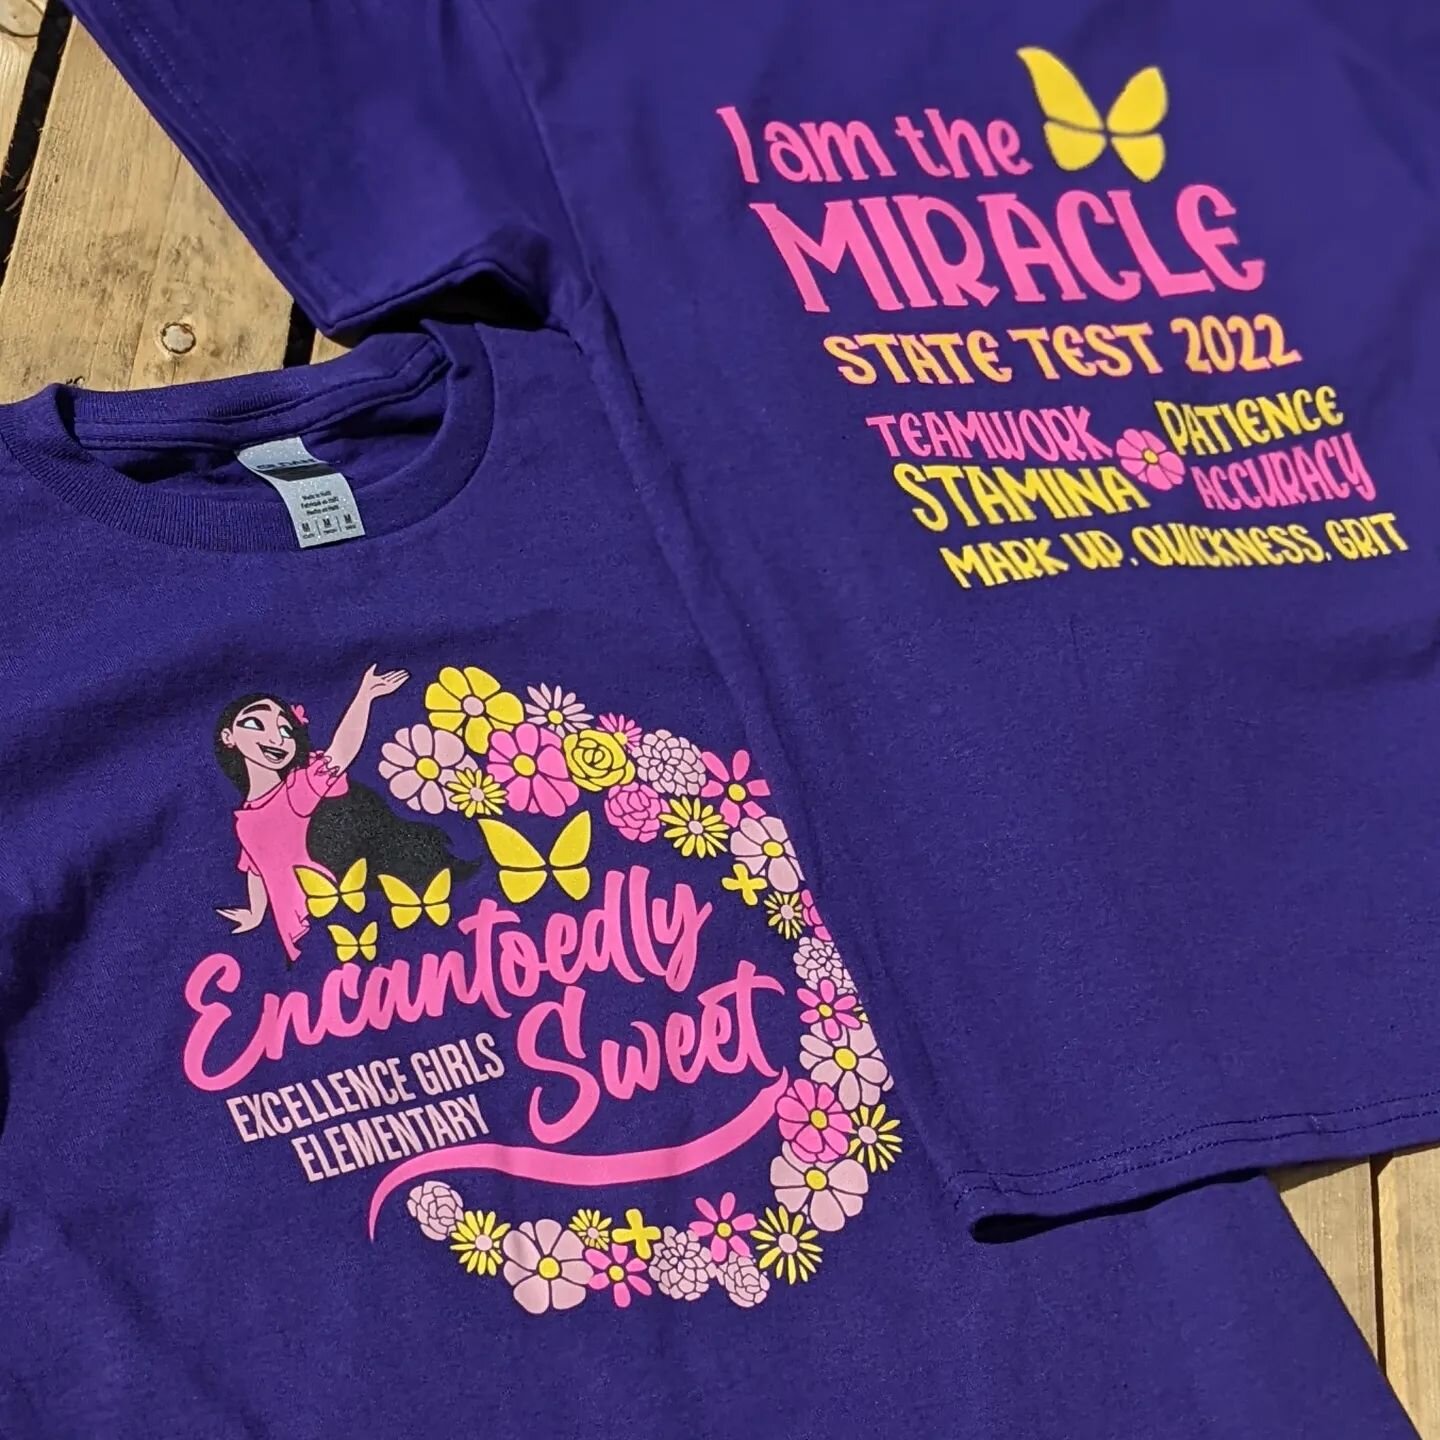 Good luck to all the students taking state testing exams next week 📝 We had so much fun working on these cool tees for @excellencegirlscharter !! #iamthemiracle #encanto 
.
.
.
#theleaguebrand #statetesting #statetestingweek #wedonttalkaboutbruno #d